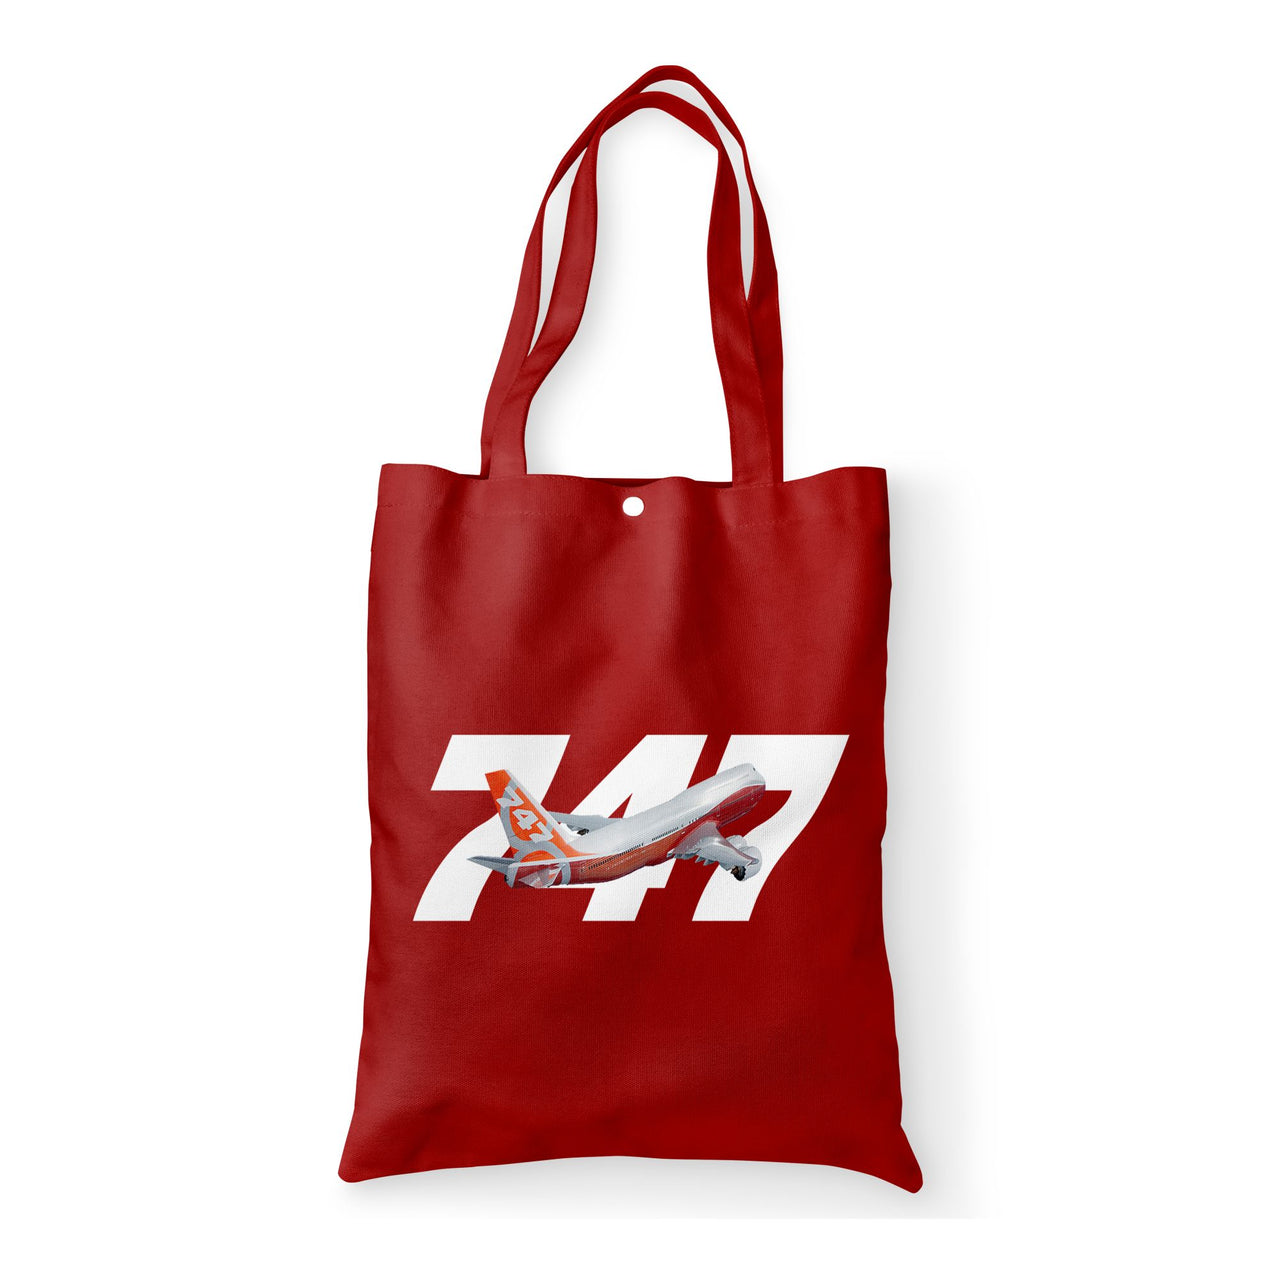 Super Boeing 747 Intercontinental Designed Tote Bags